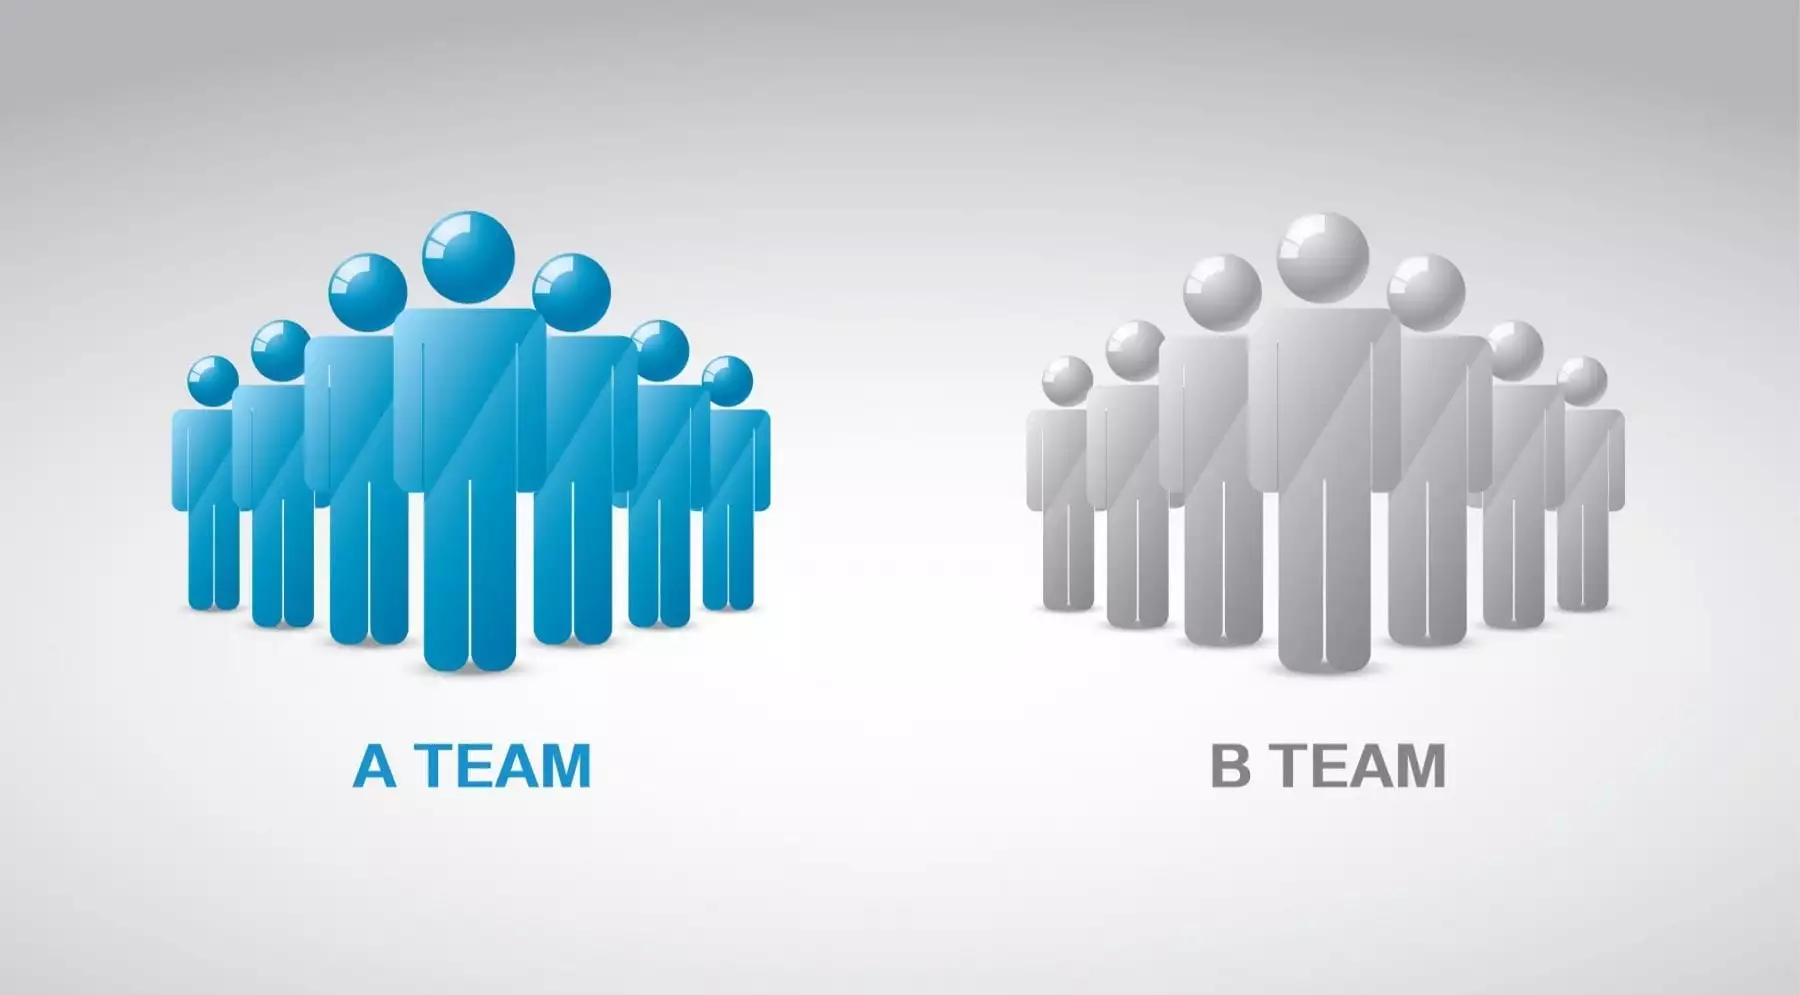 Two groups - team a and team b